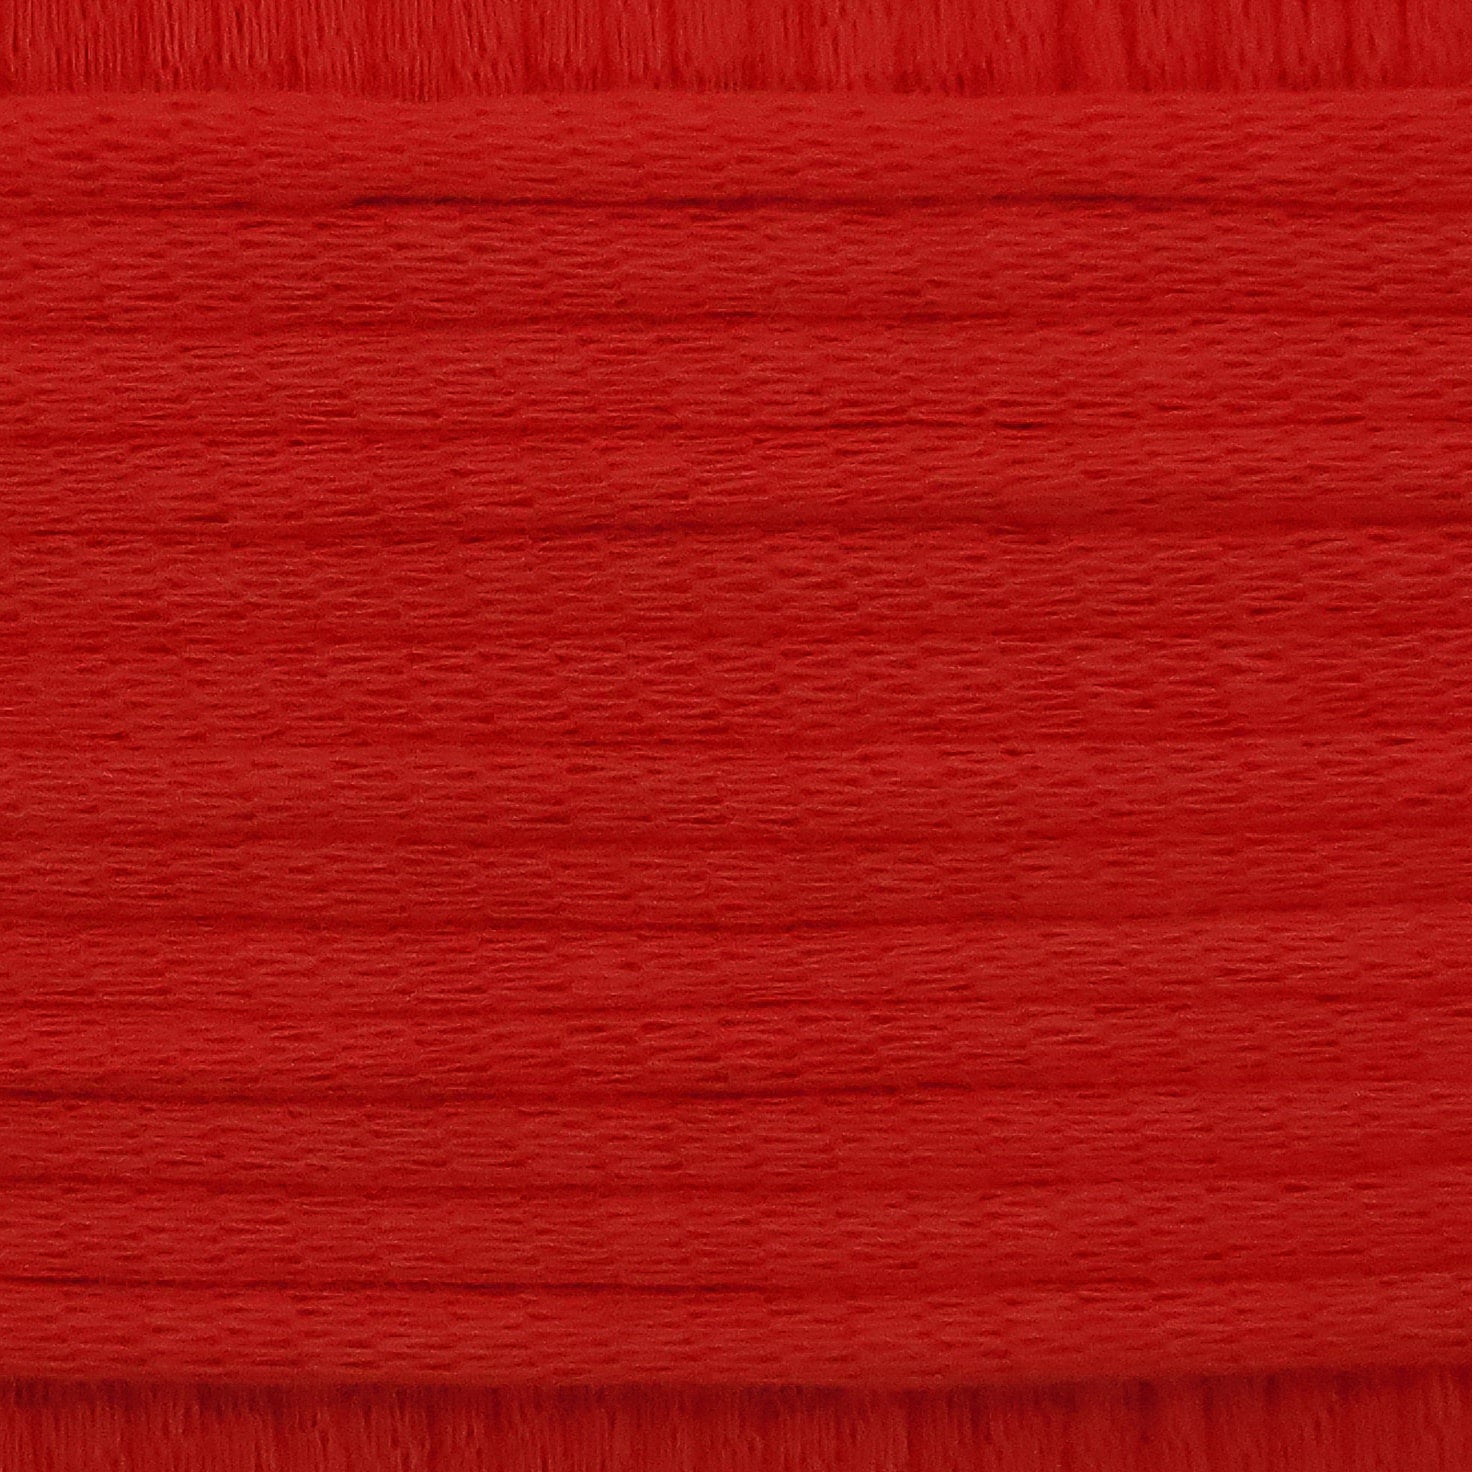 A close-up image showing the texture of a chilli red coloured yarn that is friendly for crochet beginners.